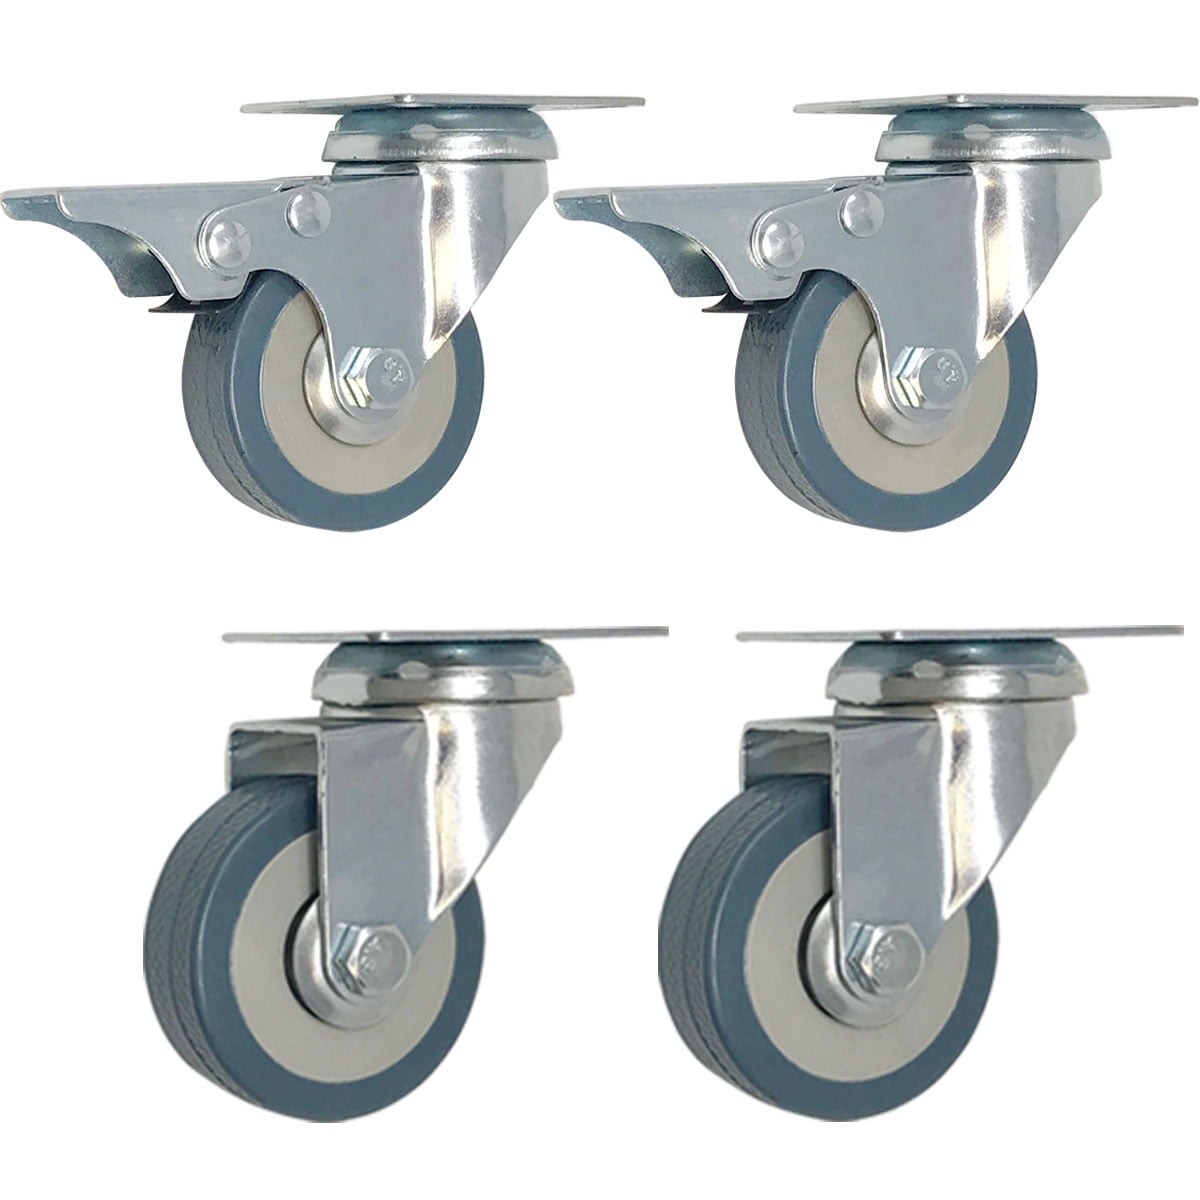 Details about   4 Pack Combo 1.25" Brown Rubber Caster Wheels Swivel Plate 2 w/brake & 2 plate 